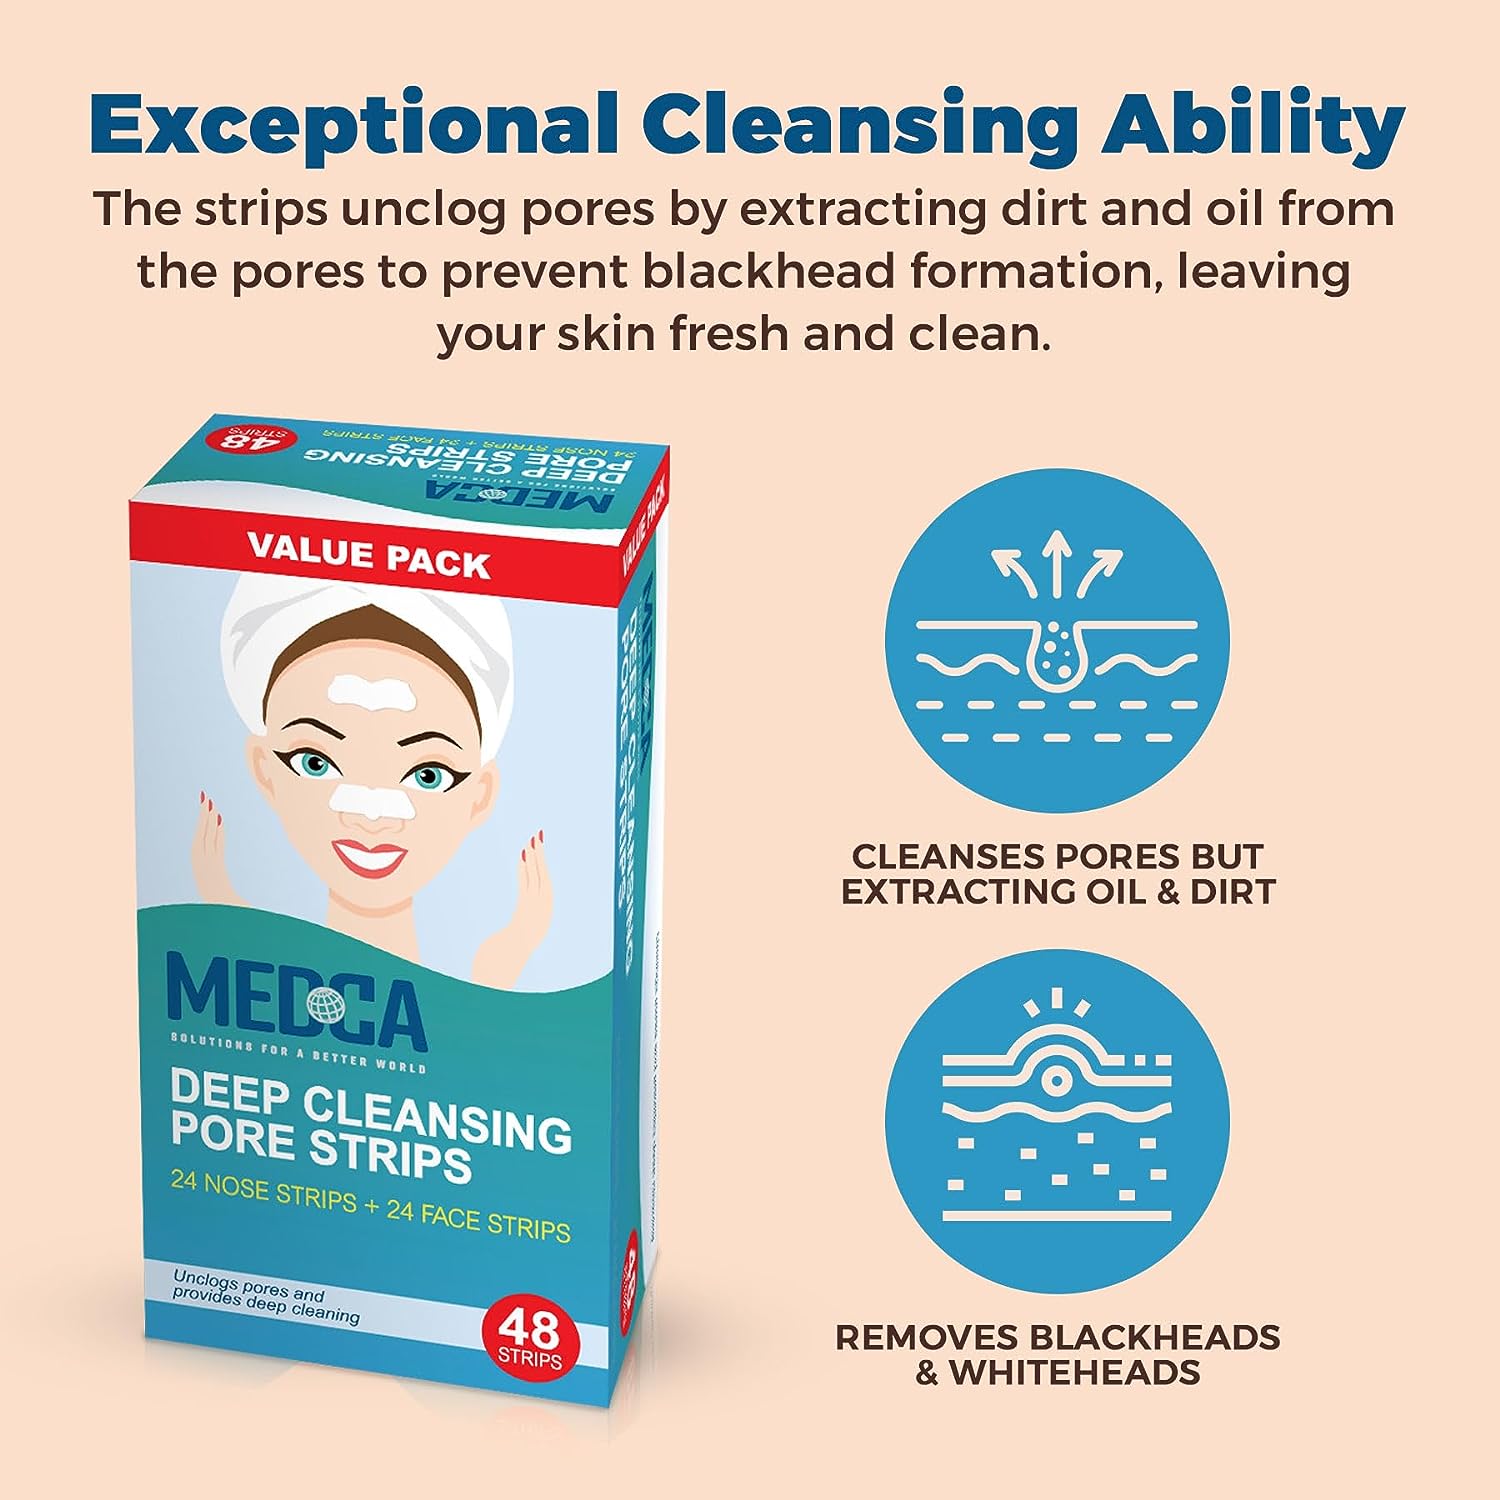 MEDca Deep Cleansing Pore Strips Combo Pack, 48 Count Strips Exfoliants & Scrubs - image 2 of 9